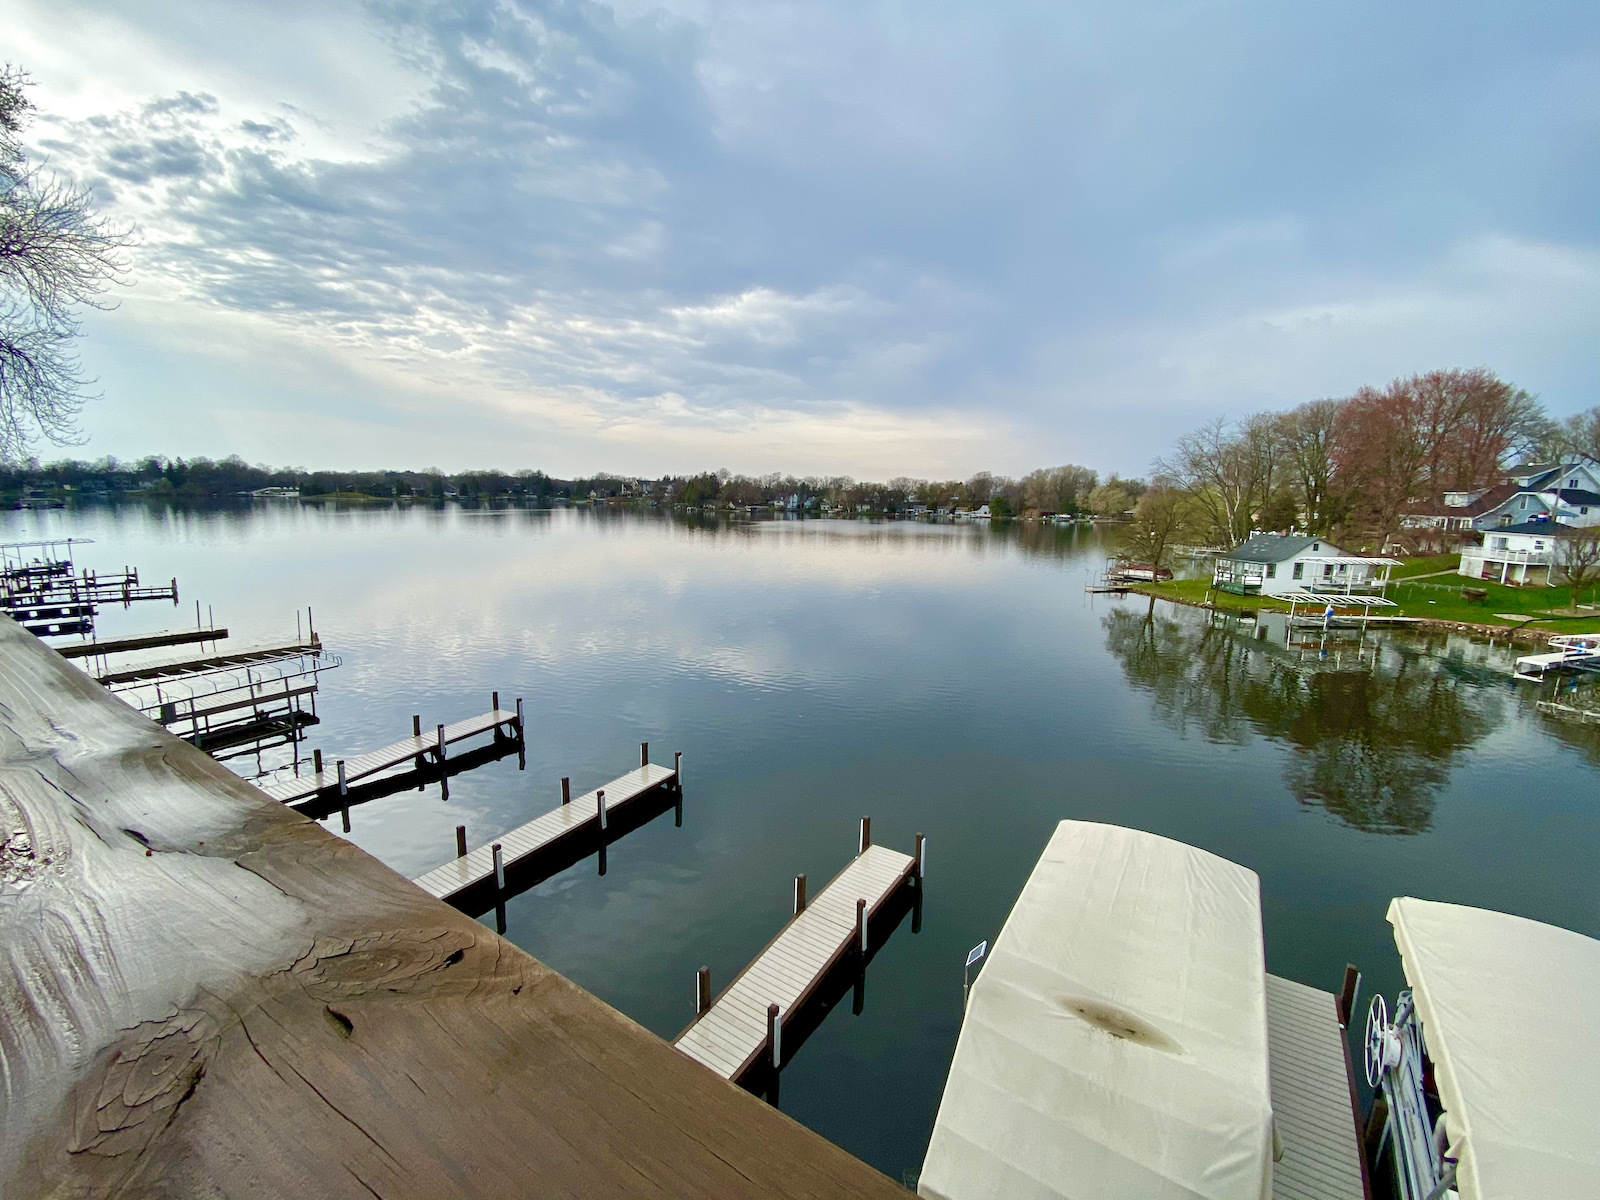 Enjoy lake views, barbeque & community at new Smoke on the Water BBQ